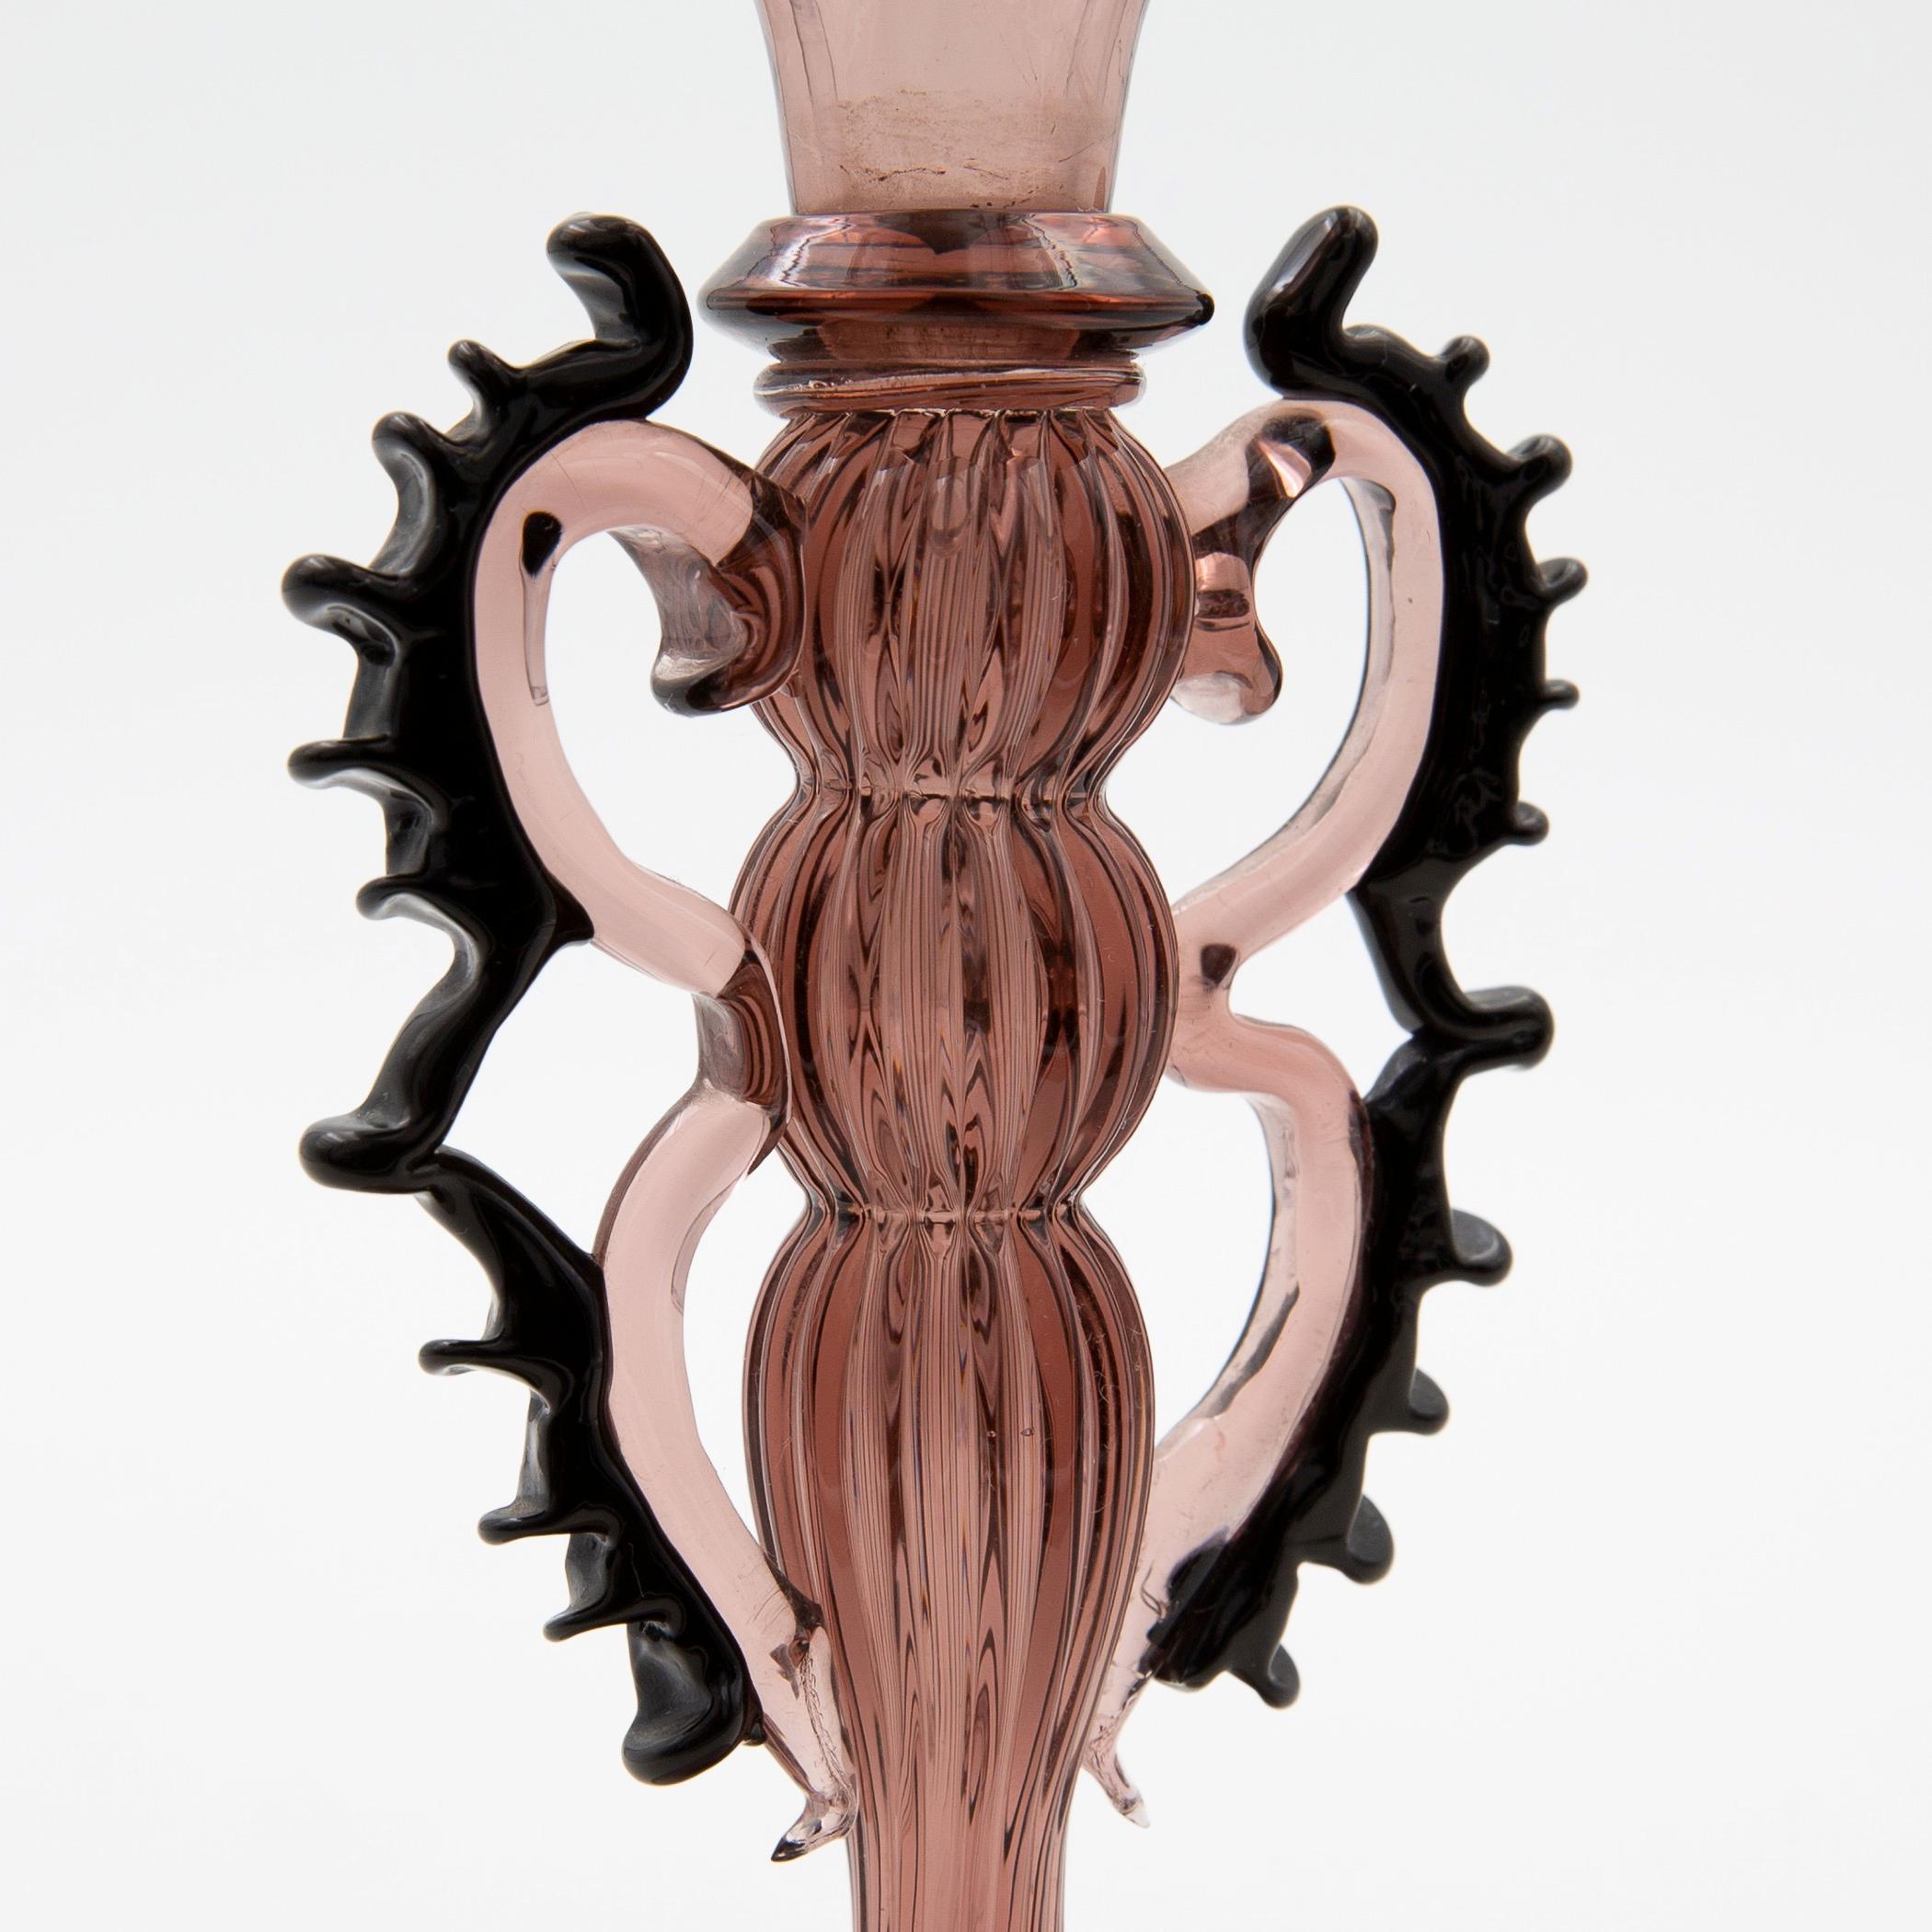 A vintage fluted decorated vase attributed to Vittorio Zecchin and produced by Venini Murano in Italy.
Acid stamped Venini Murano Italia
This vase has been blown between 1950 and 1965 (period during 3 lines acid stamp was used).